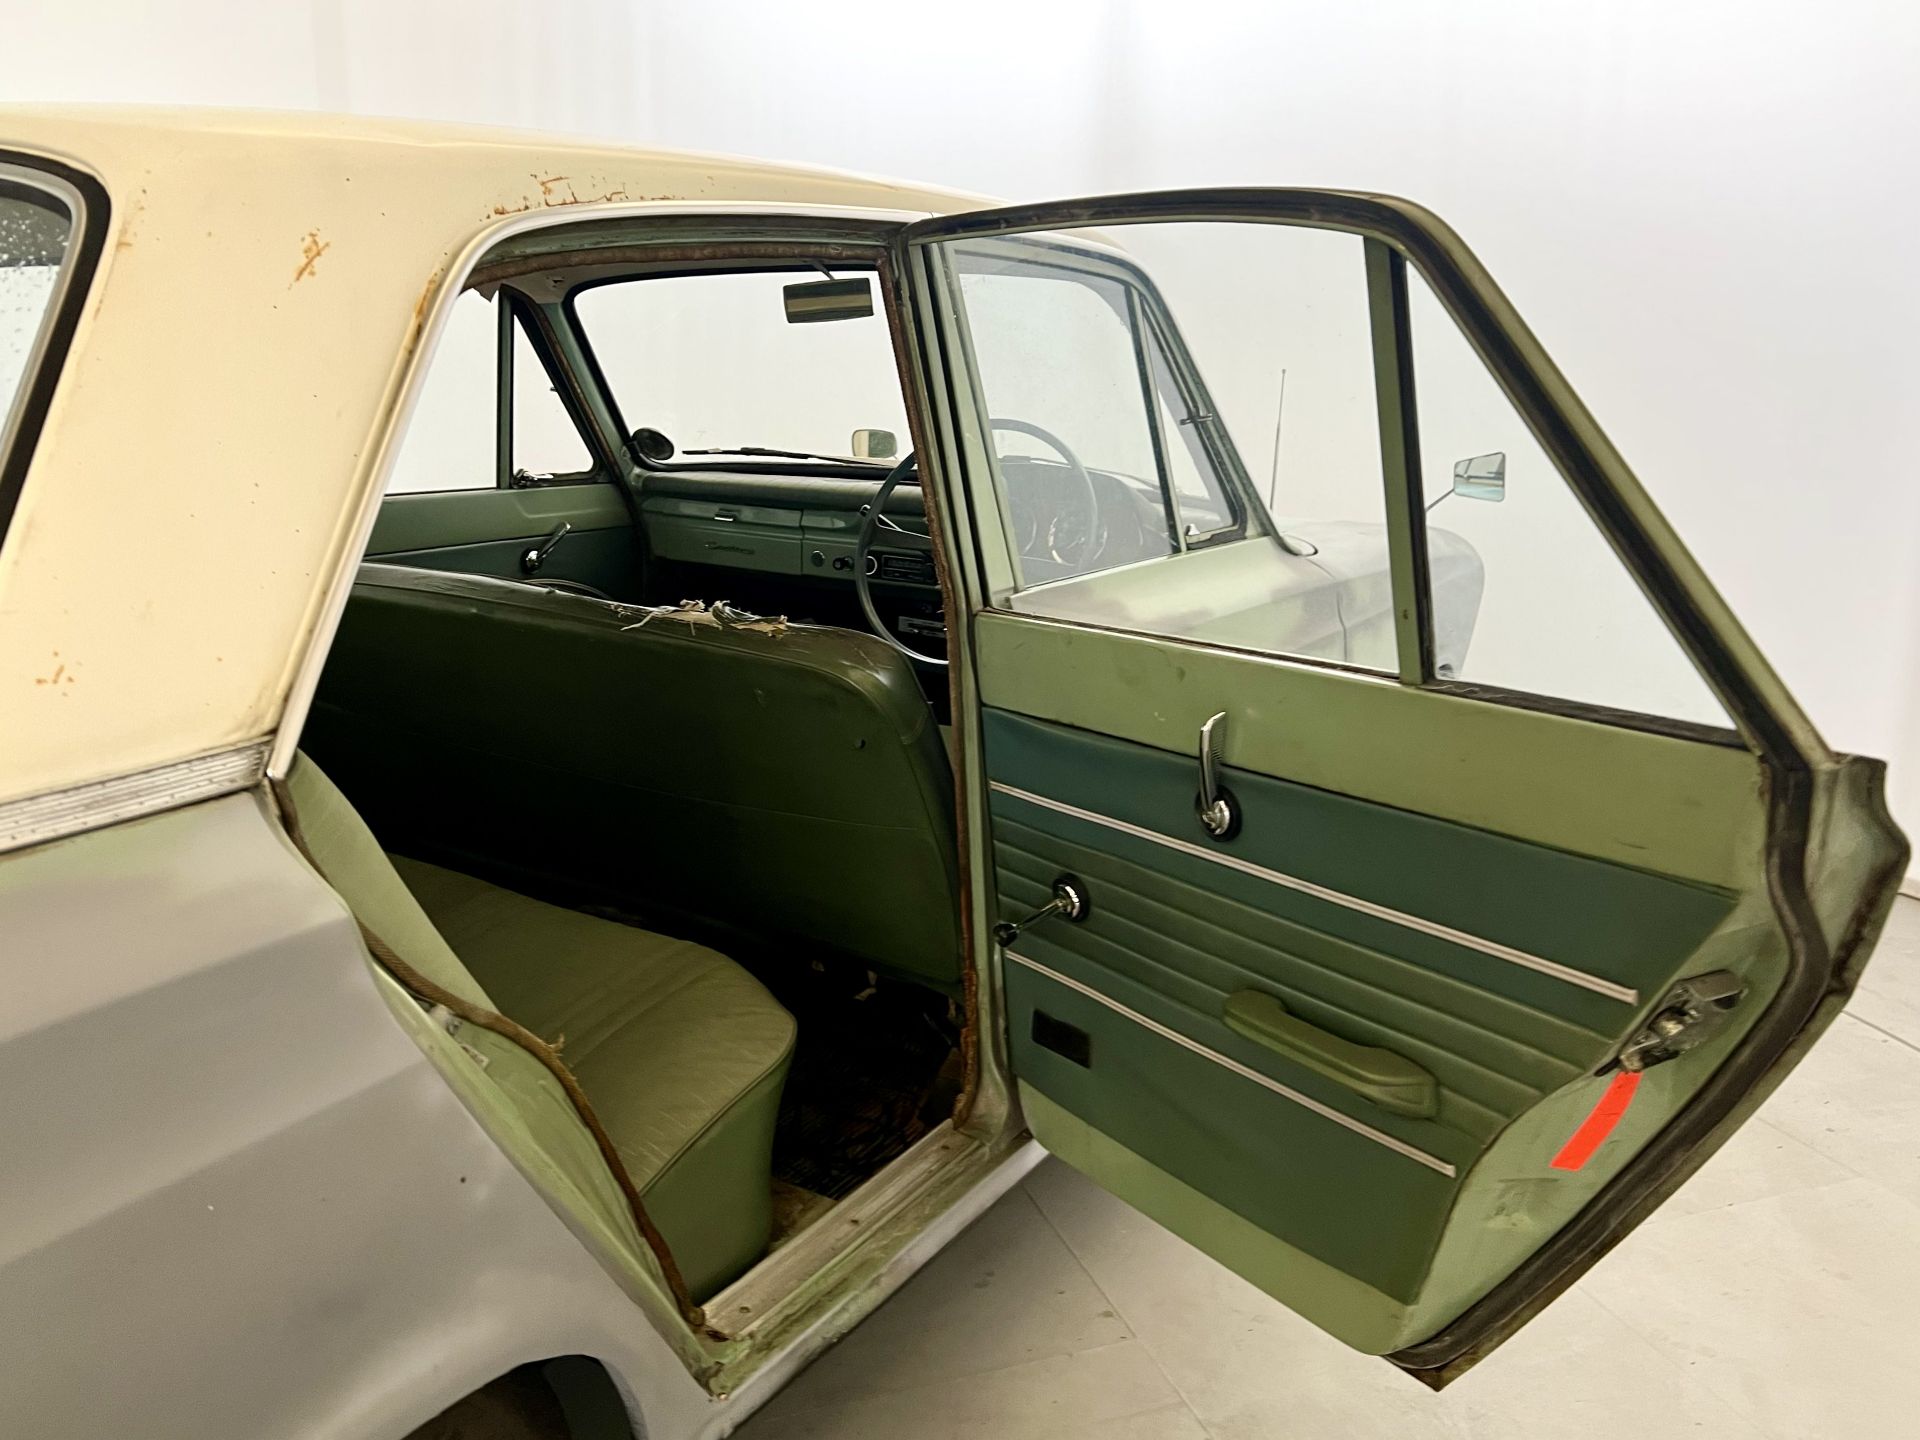 Ford Cortina Deluxe - Image 20 of 31